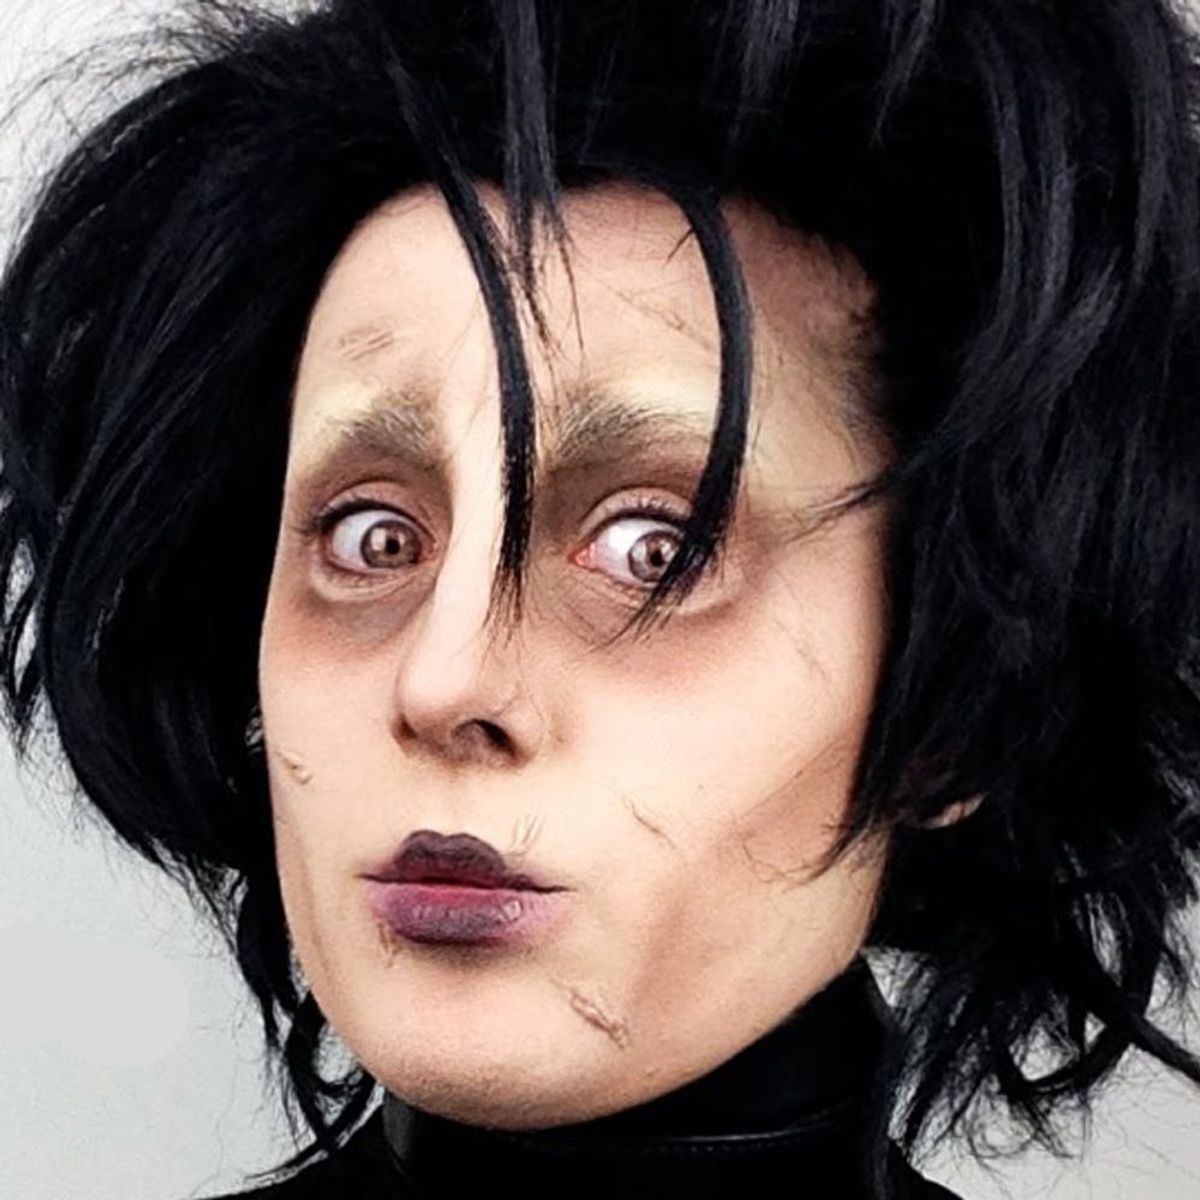 15 Halloween Makeup Tutorials Inspired by Your Fave Dudes